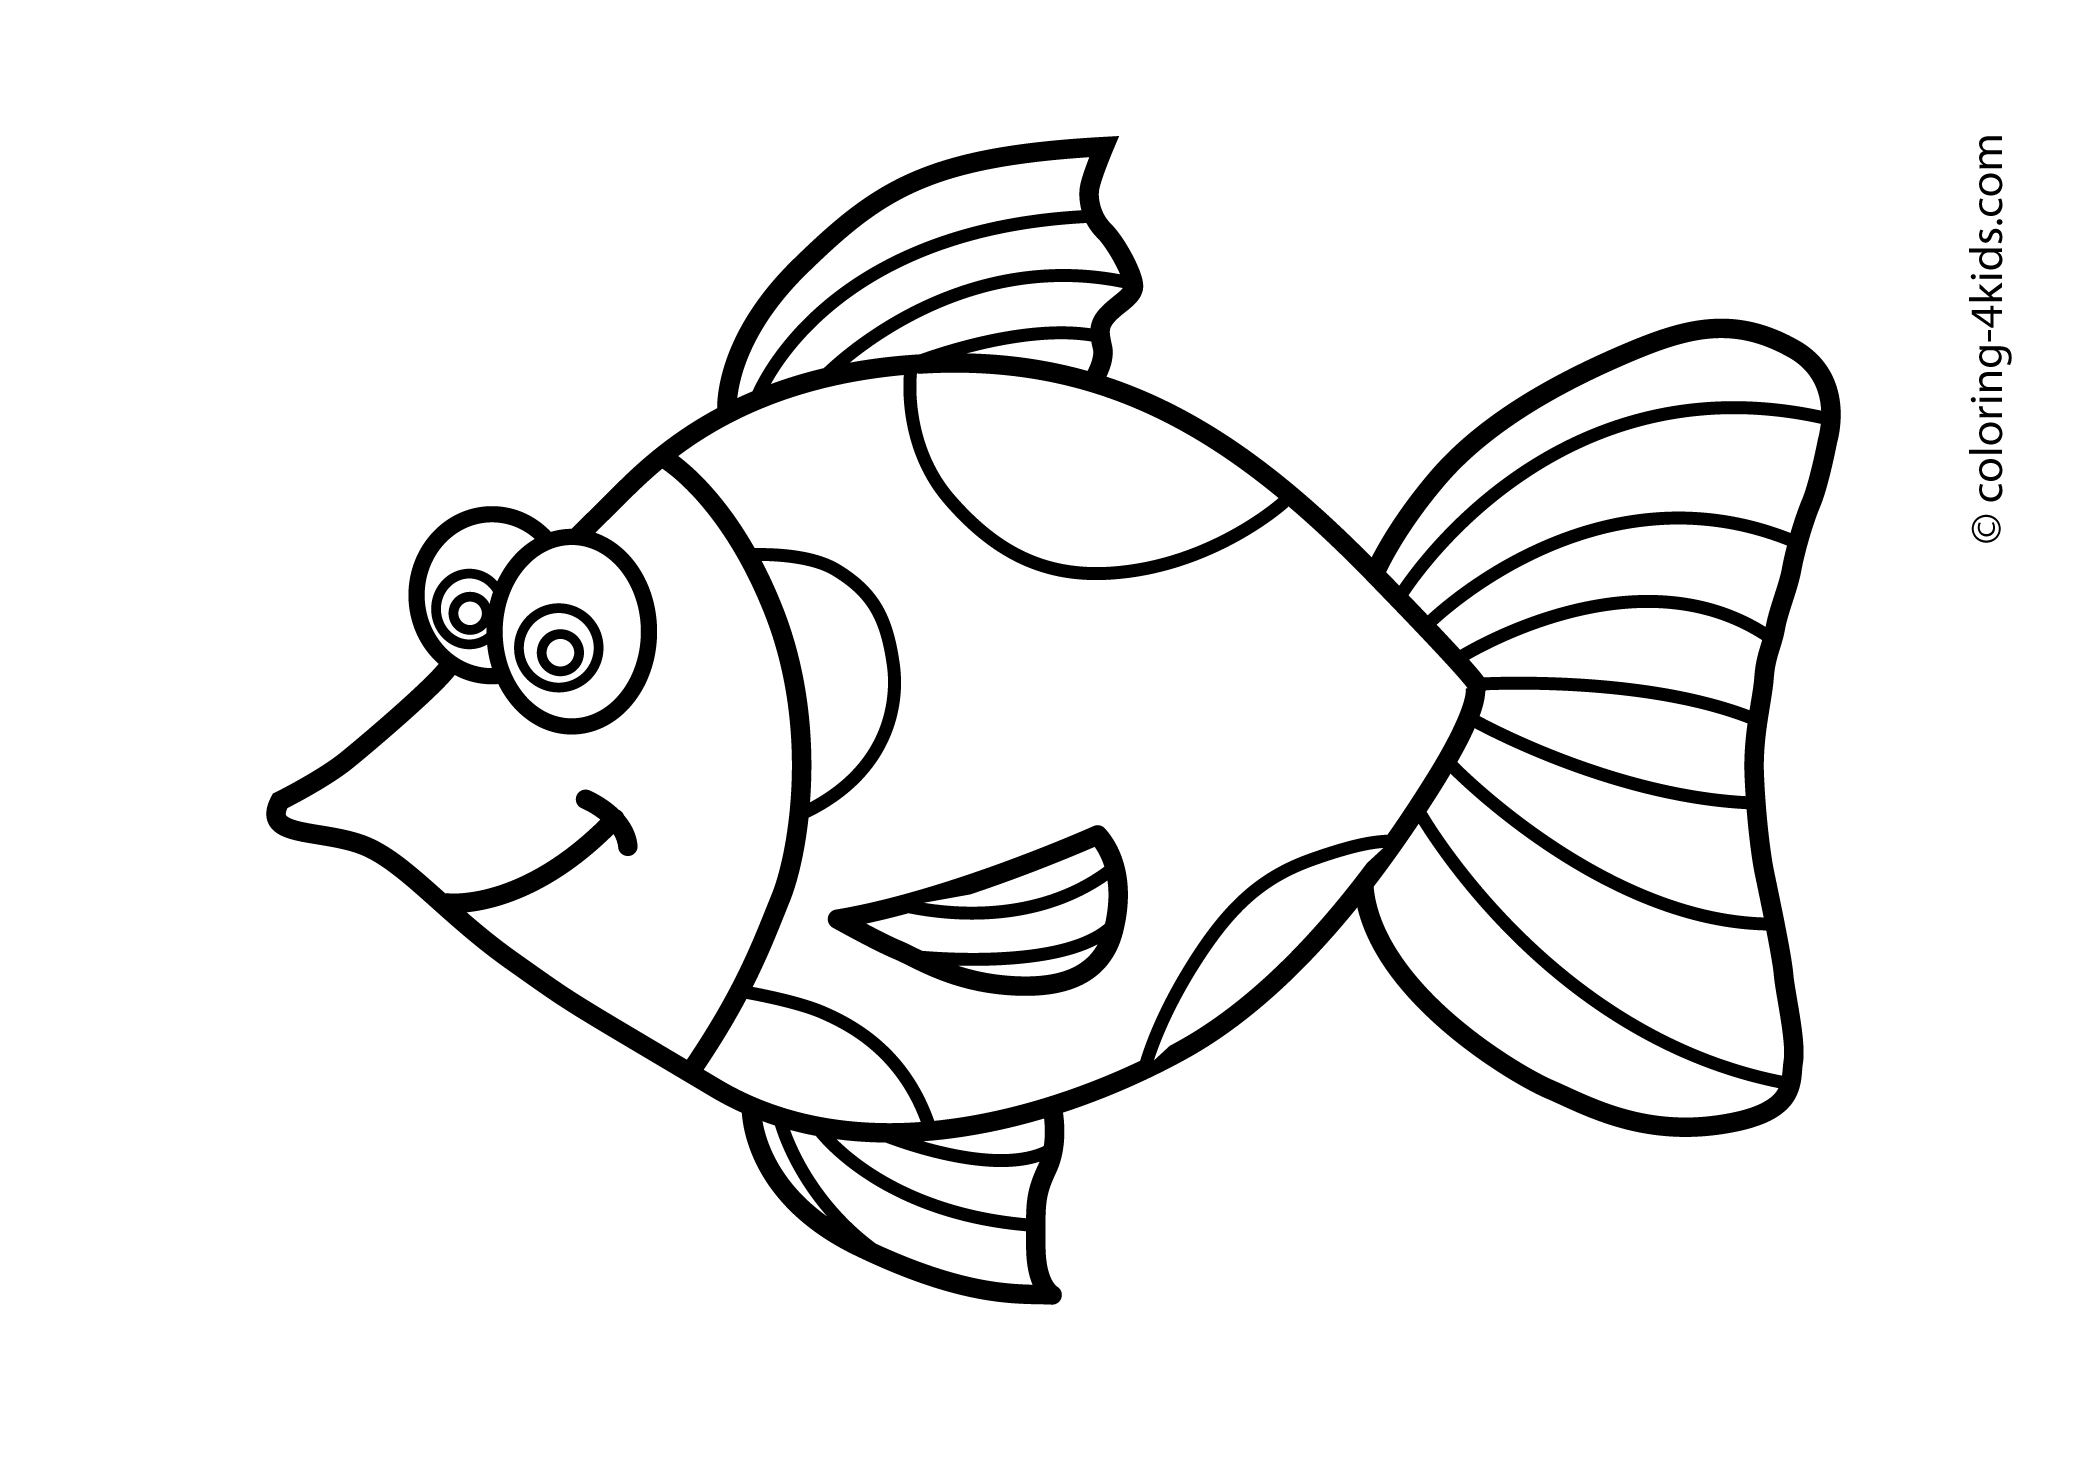 Fish Animals coloring pages for kids, printable free | coloing ...